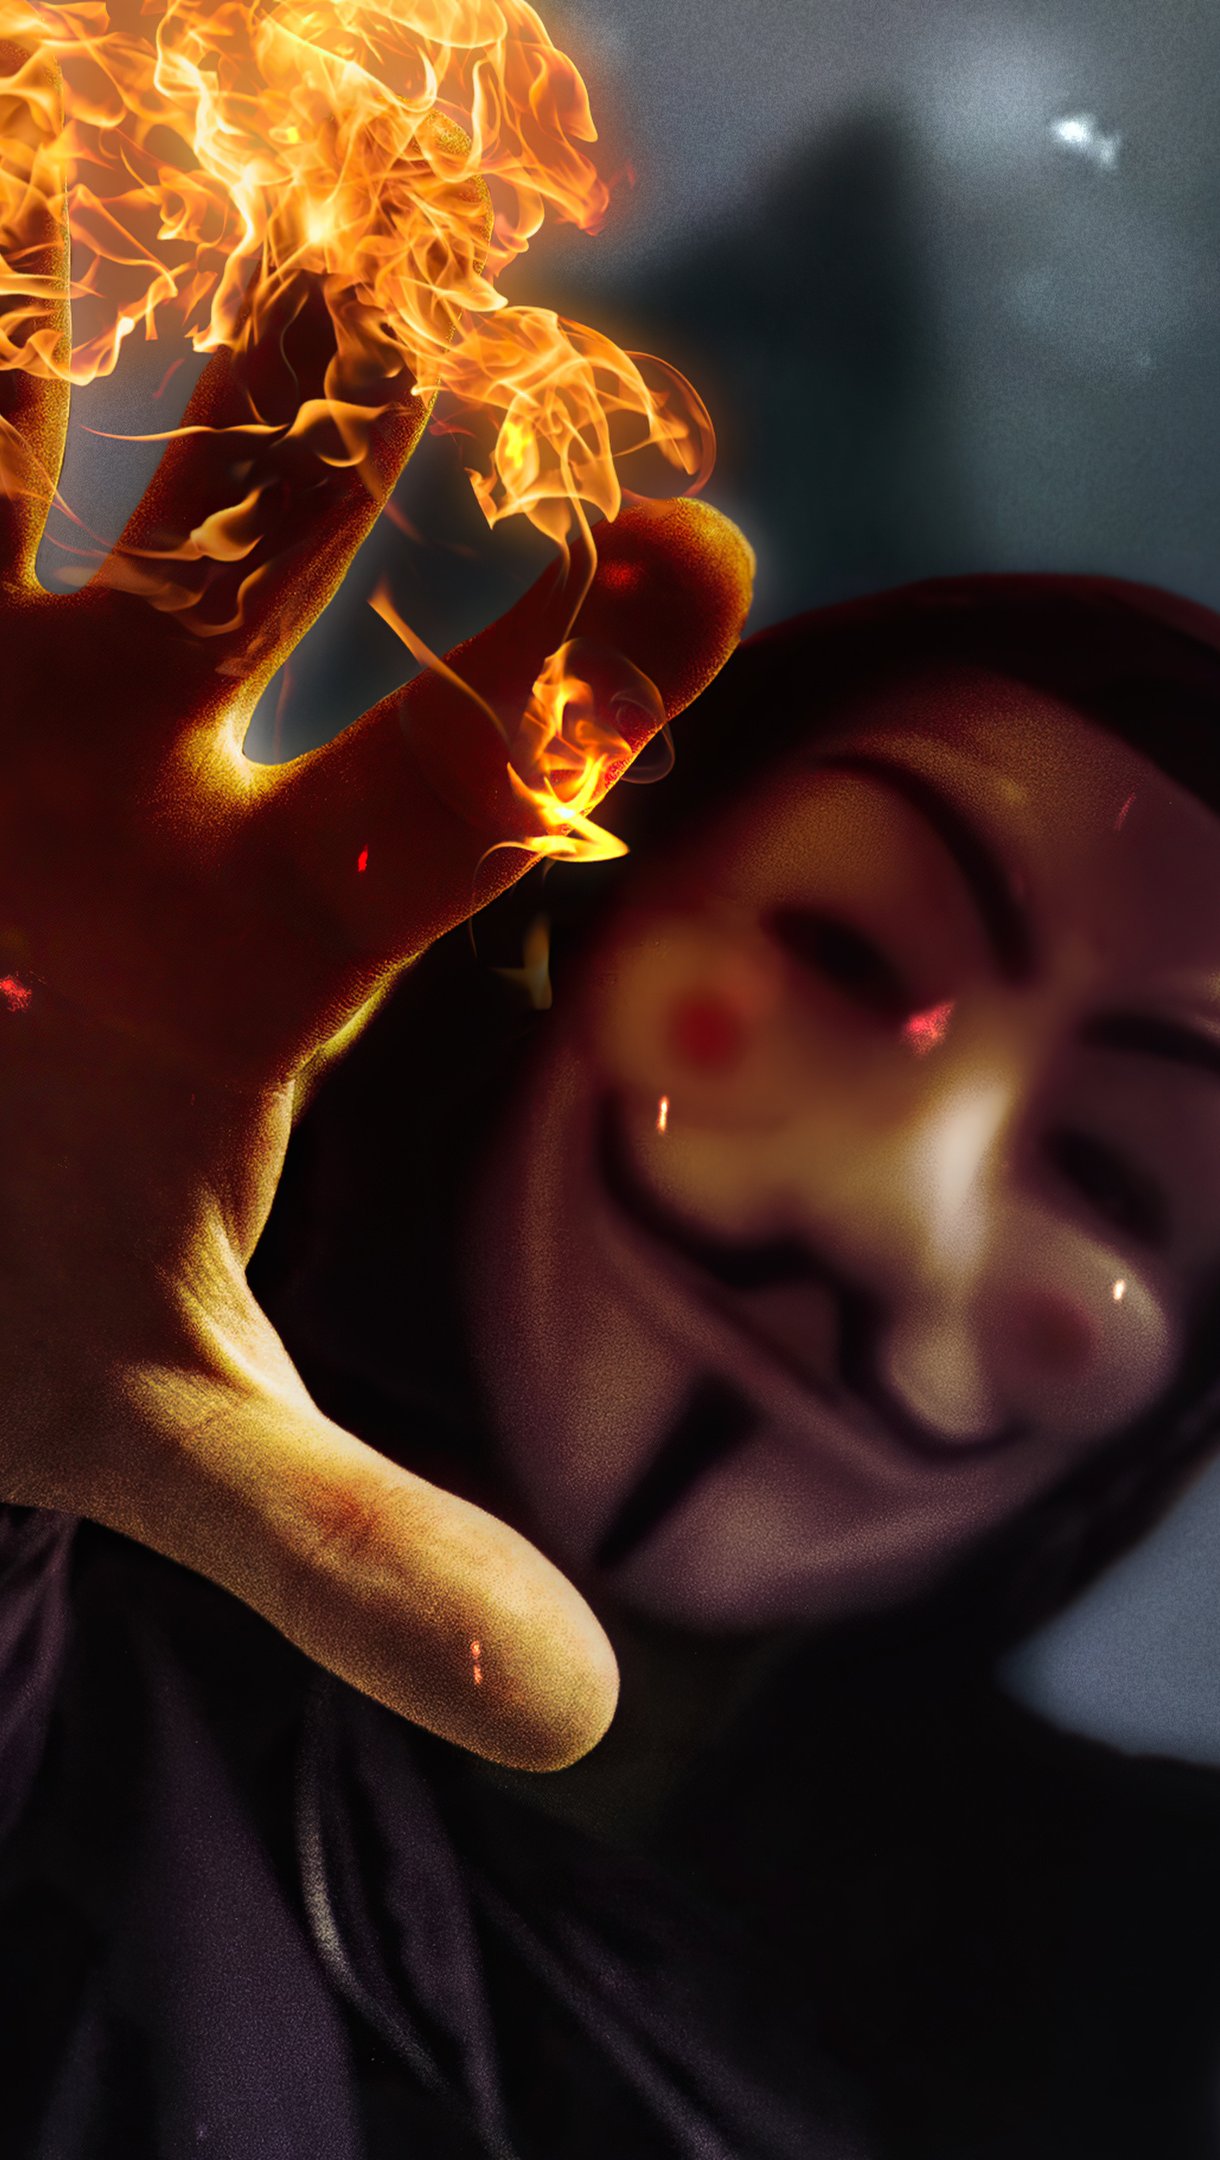 Anonymous mask with burning hand Wallpaper 4k Ultra HD ID:5262